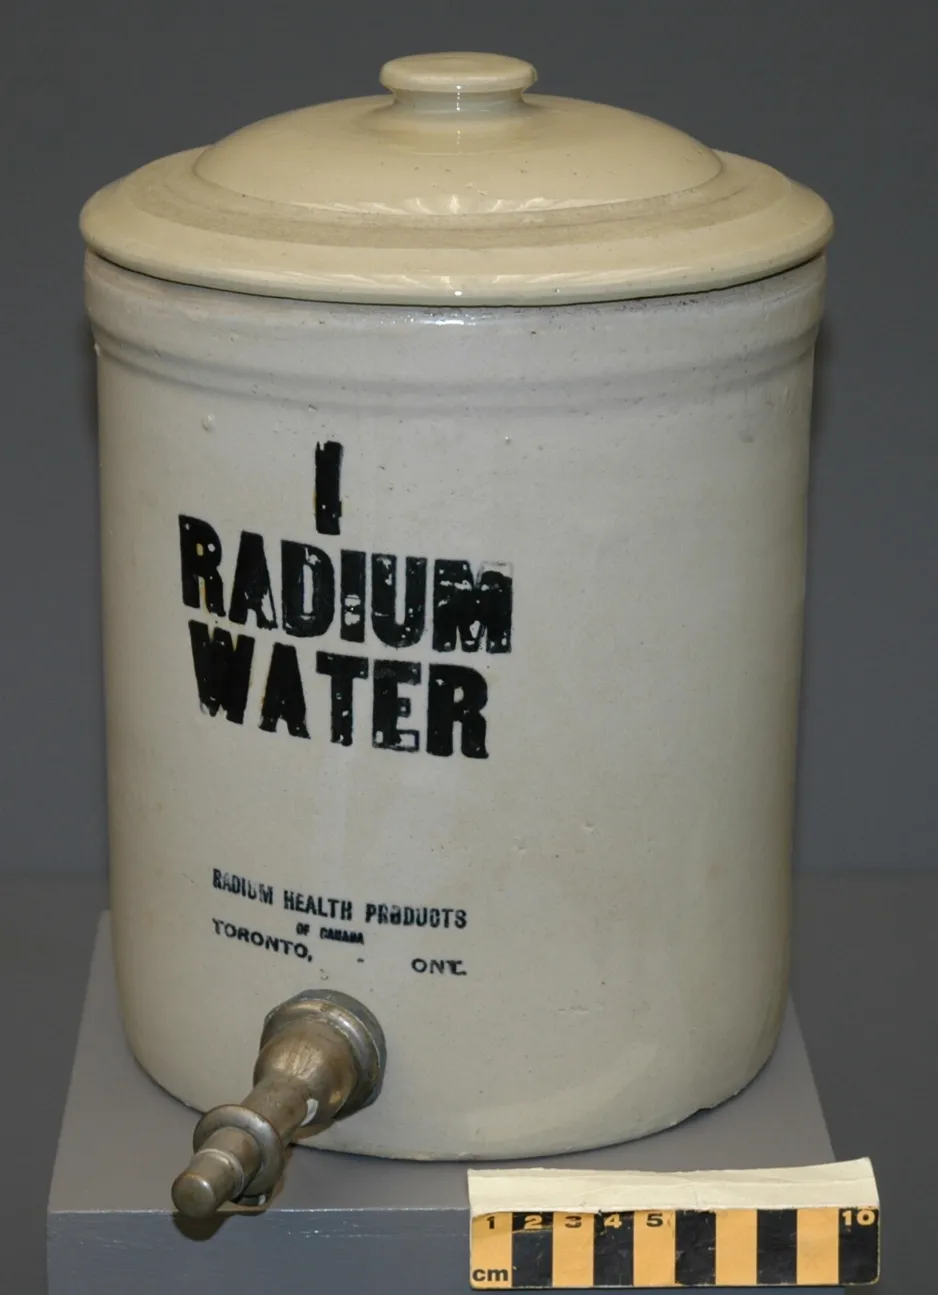 An off-white ceramic jar with ceramic lid and metal spigot at the bottom. The jar has “I RADIUM WATER” and the manufacturer’s information “RADIUM HEALTH PRODUCTS/ TORONTO, ONT.” stenciled on the side in black paint.